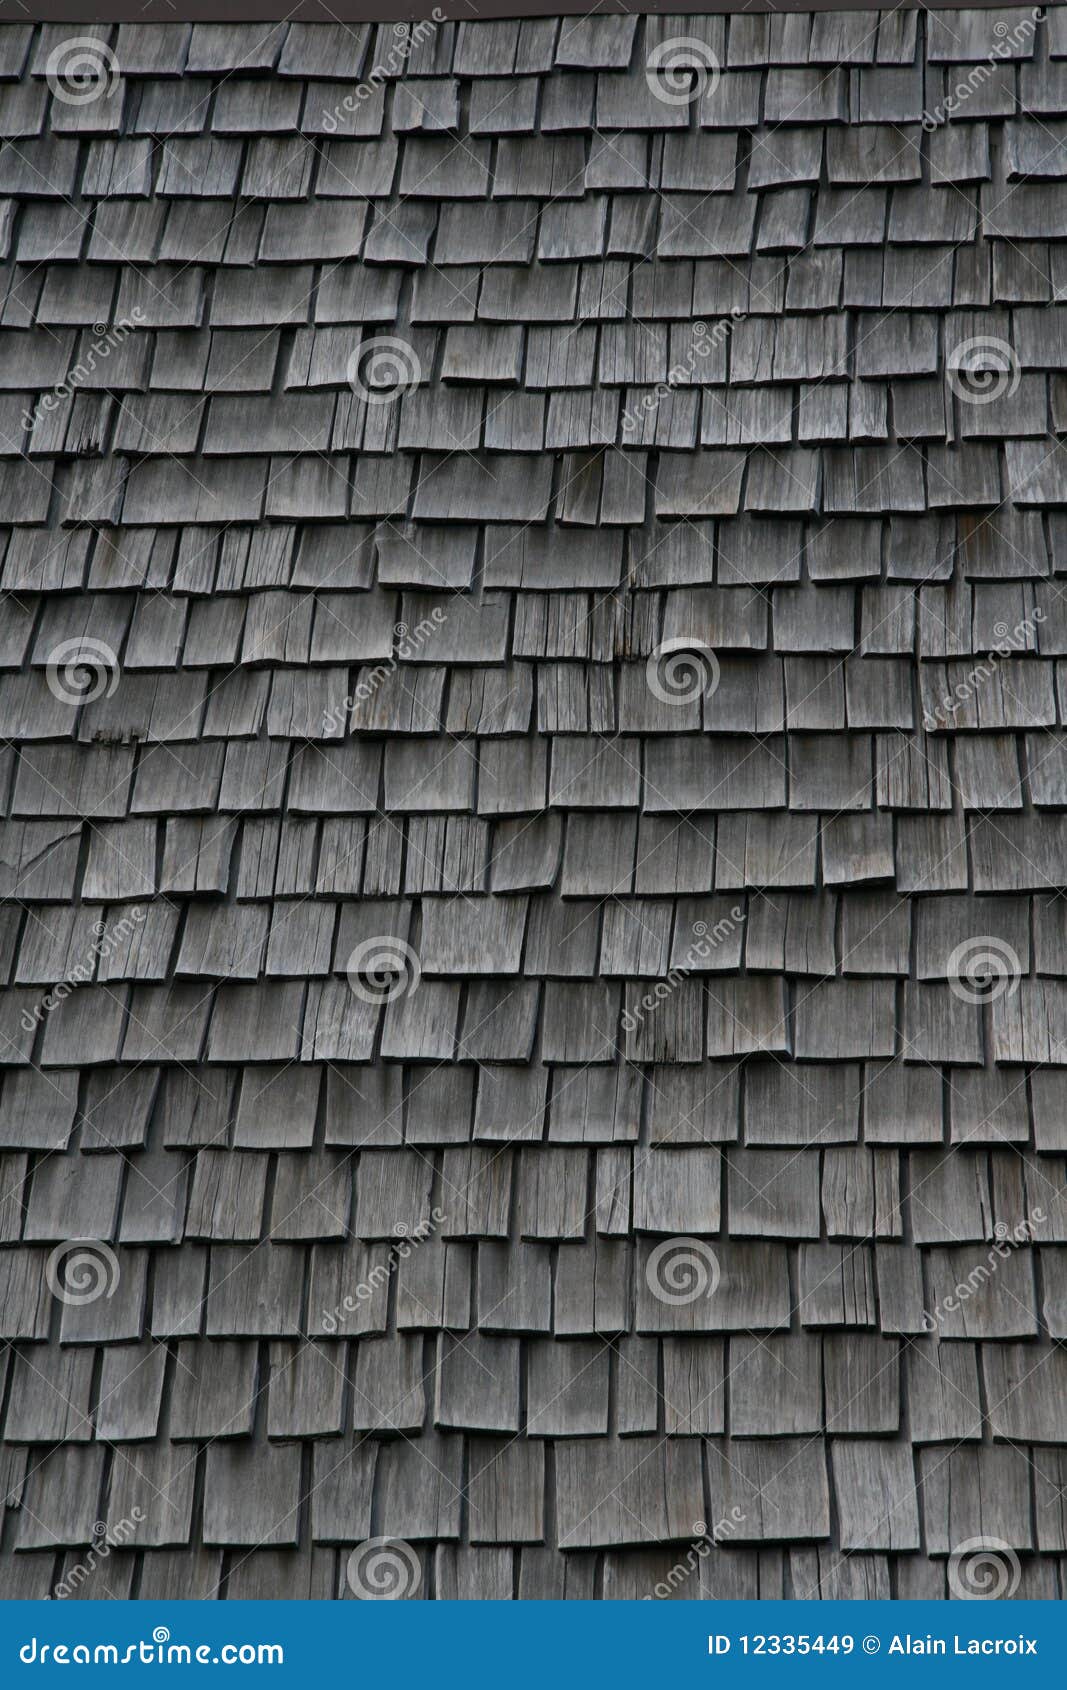 Wooden rooftops stock image. Image of overlap, outdoors - 12335449